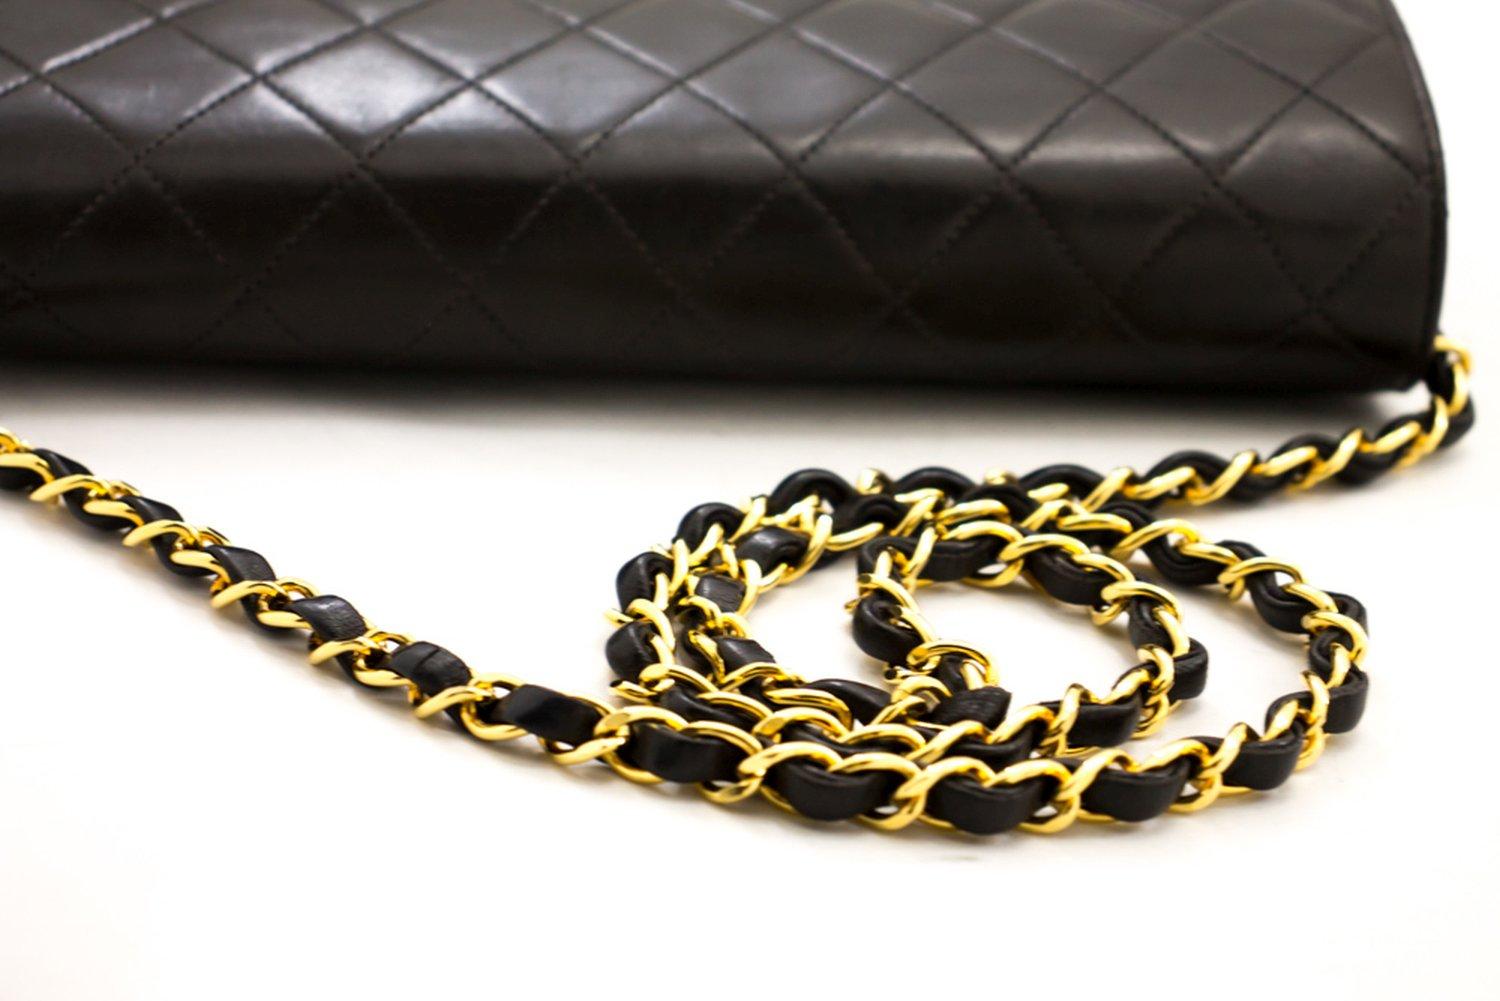 CHANEL Full Chain Flap Shoulder Bag Black Clutch Quilted Lambskin 9